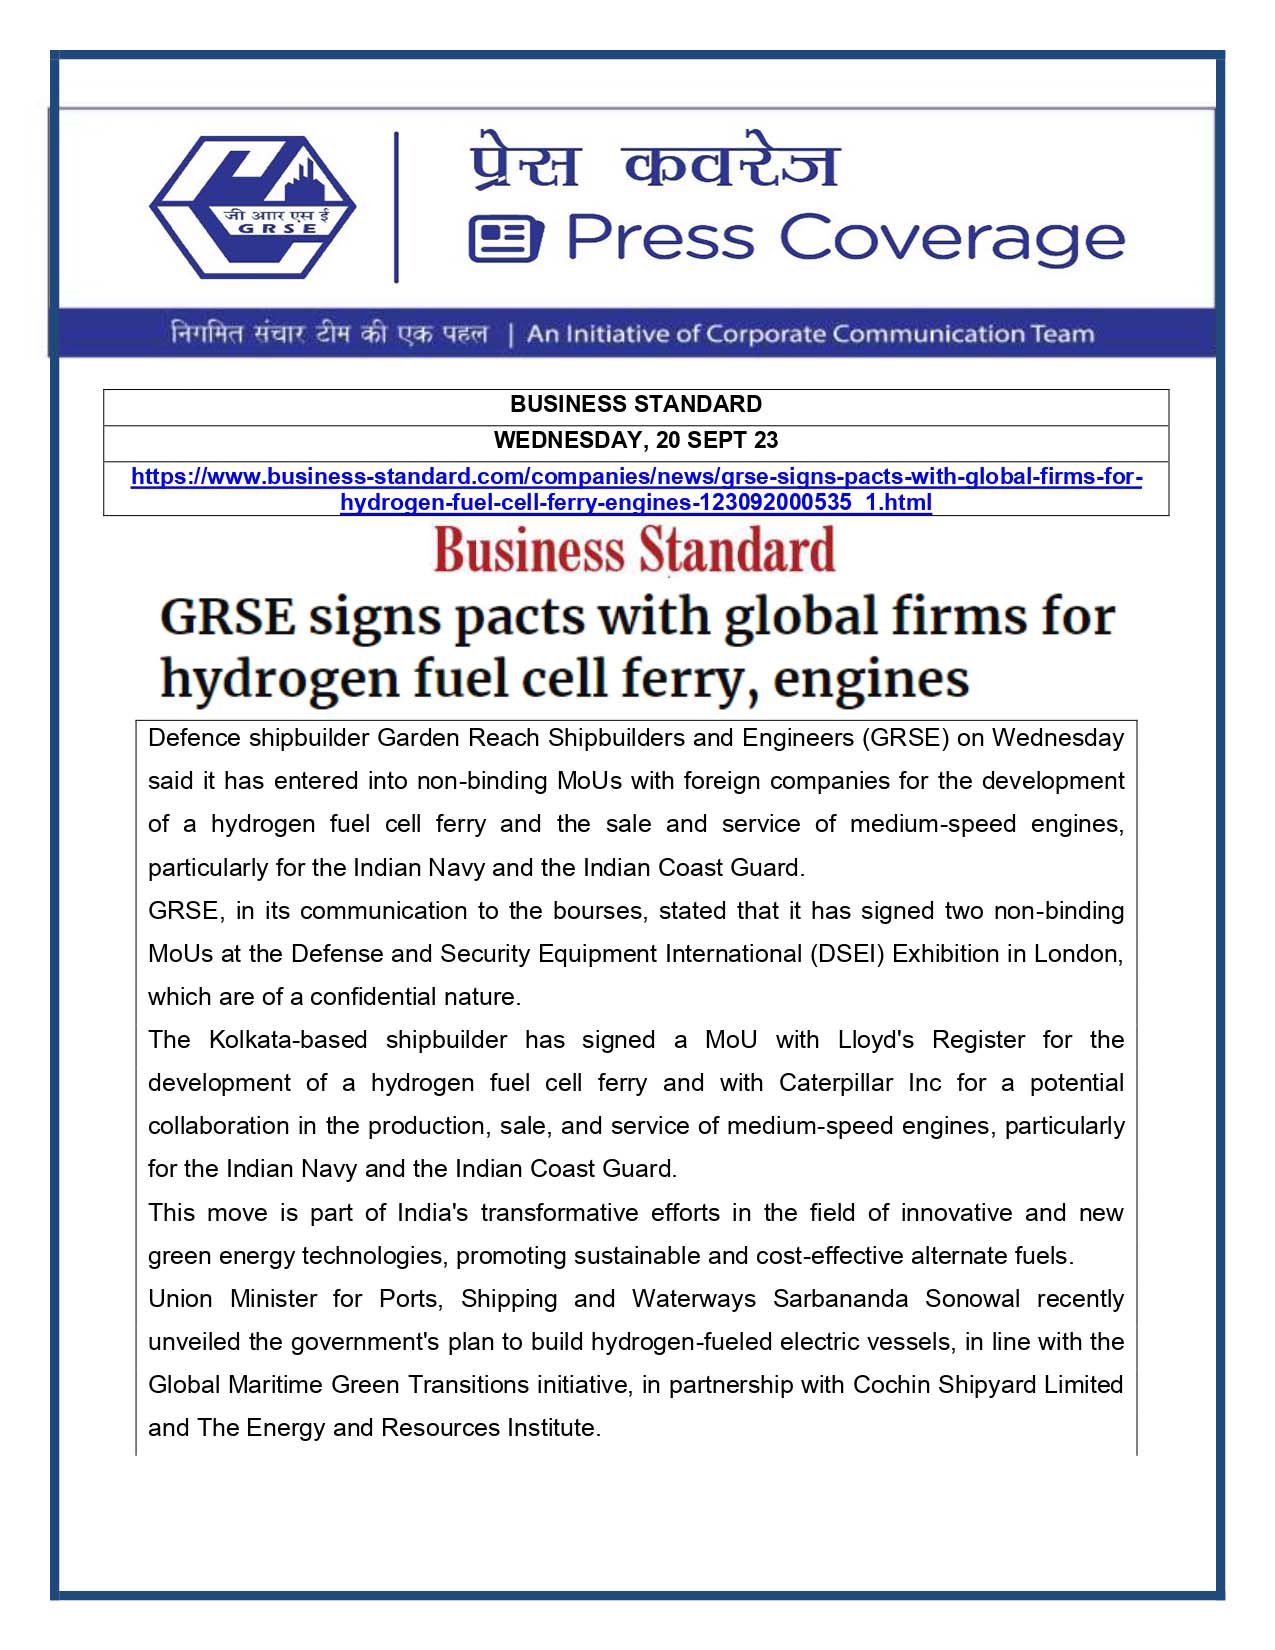 Press Coverage : Business Standard, 20 Sep 23 : GRSE signs pact with Global firms for Hydrogen Fuel Cell Ferry and Medium-Speed Engines